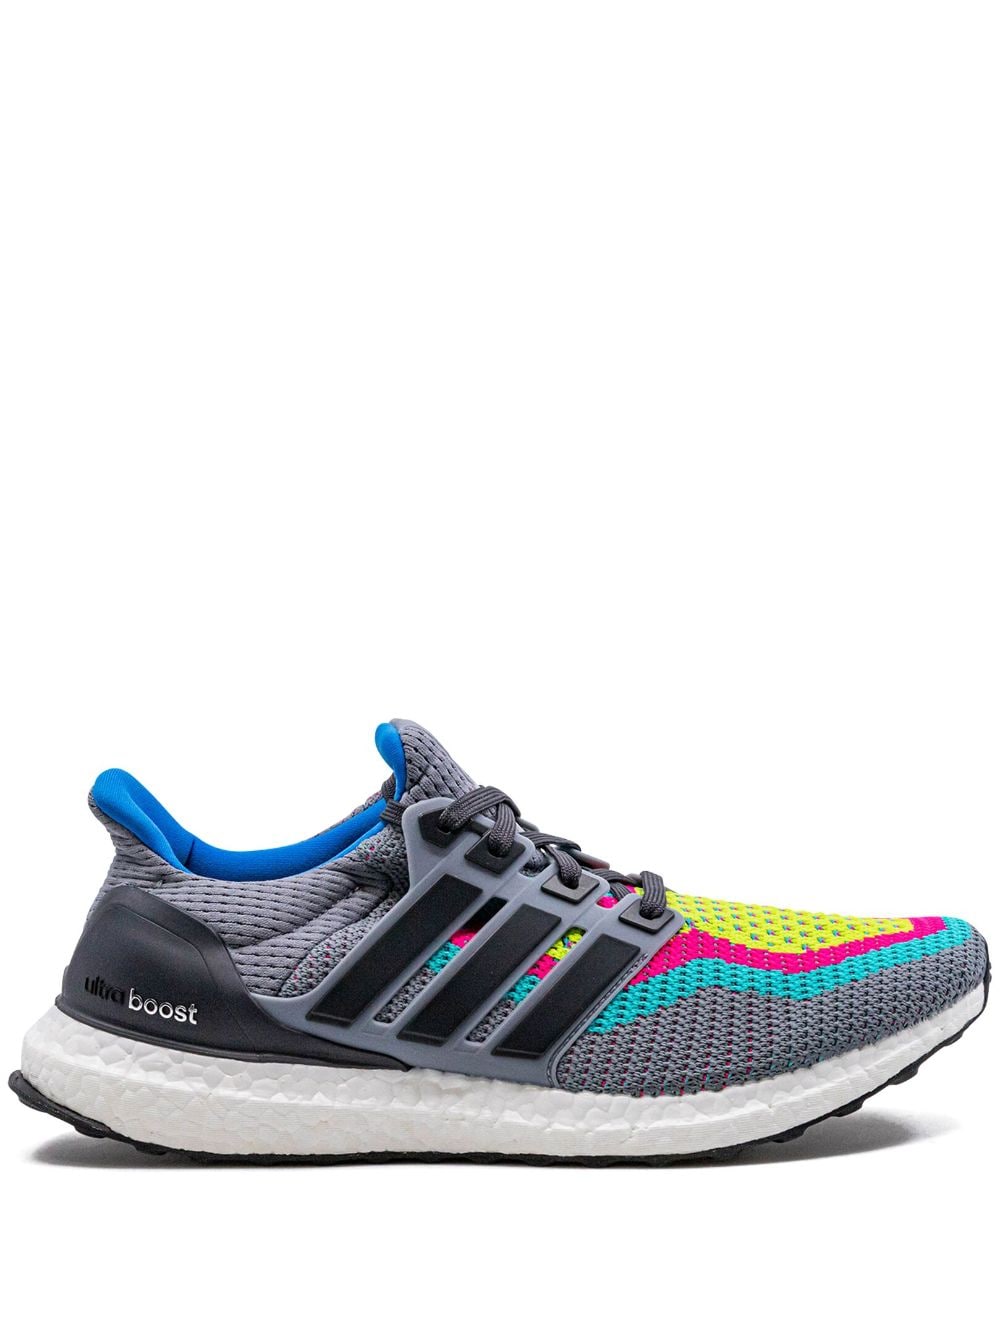 adidas Ultra Boost low-top sneakers